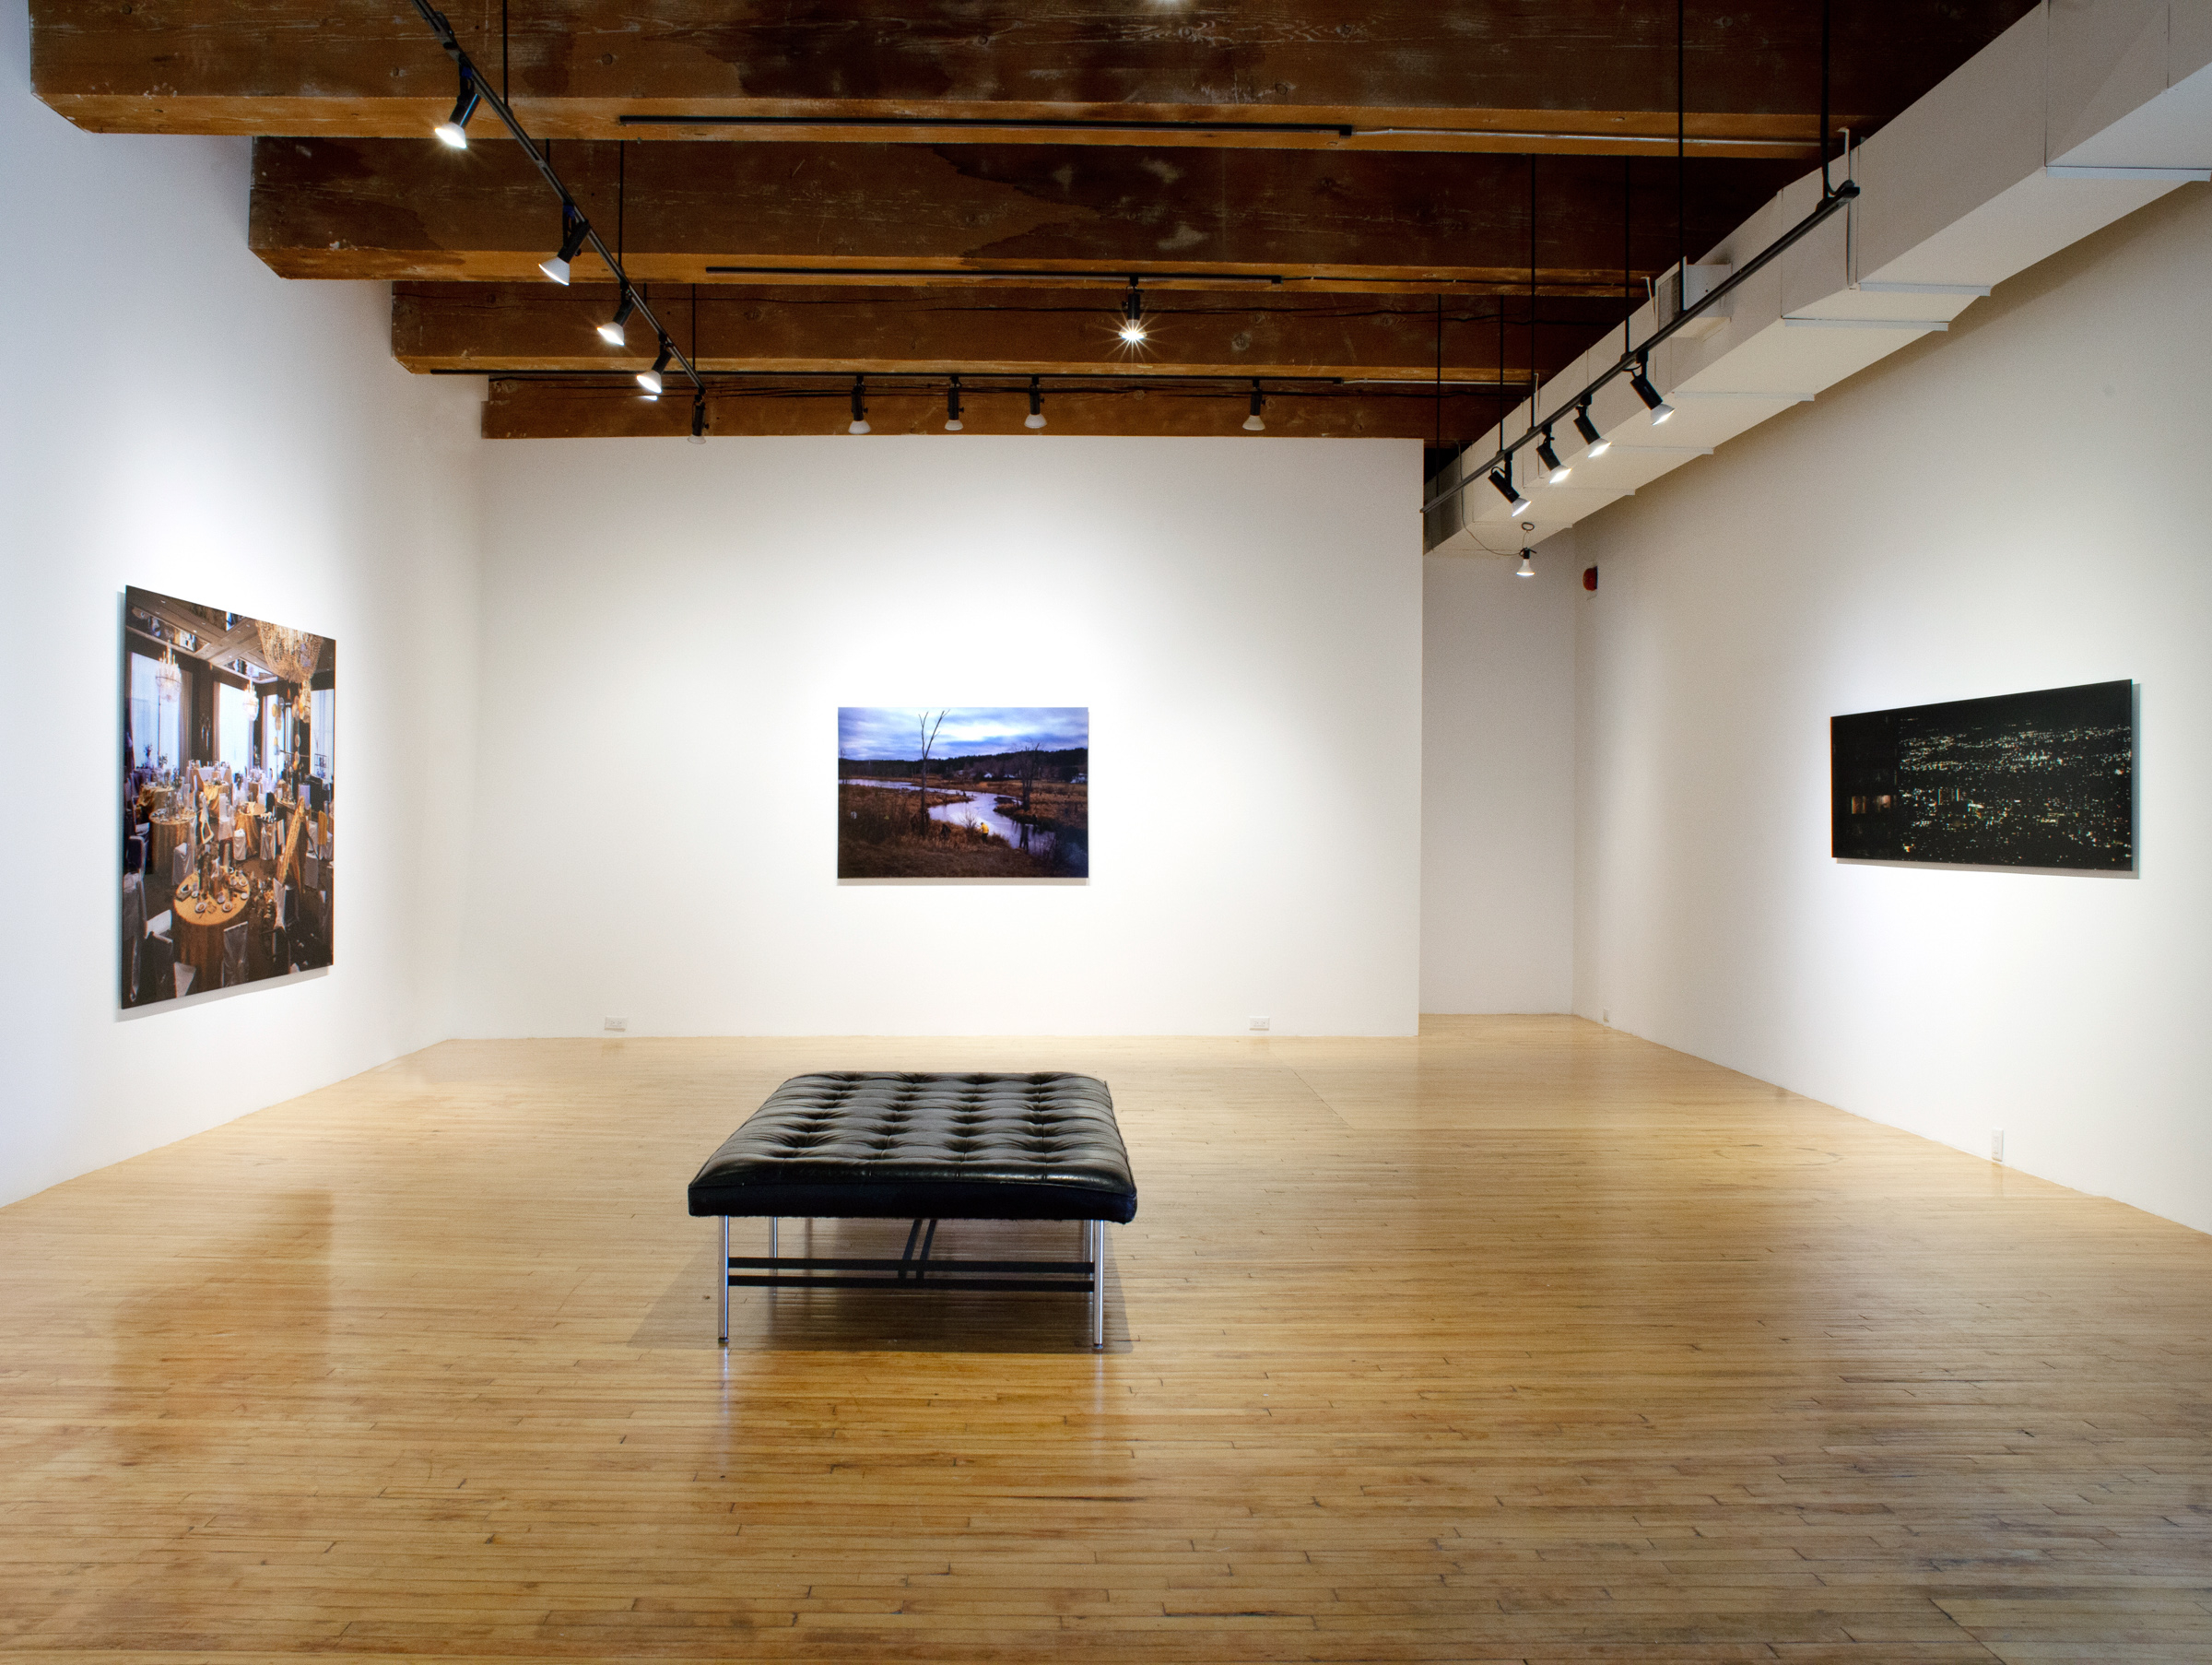     Carlos &amp; Jason Sanchez, New Work, installation view, Christopher Cutts Gallery, 2022. Courtesy of the artists and Christopher Cutts Gallery

